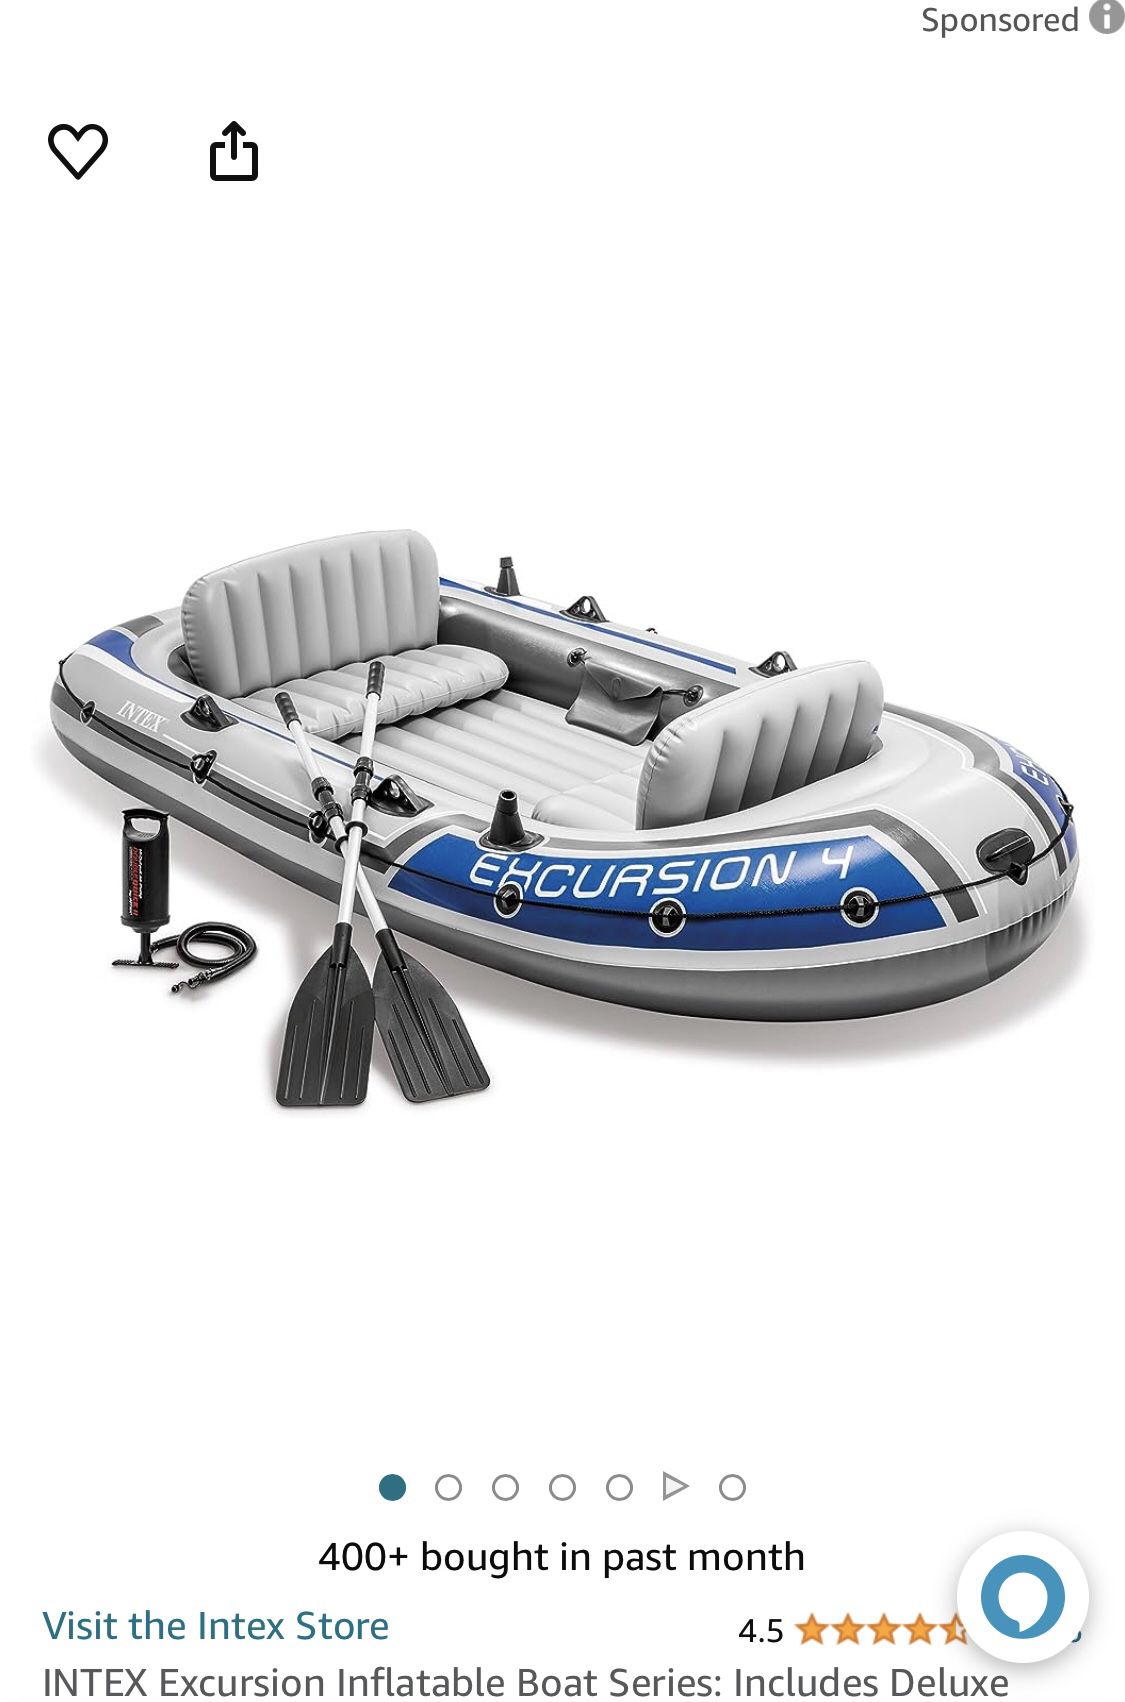 Intex Excursion 4 Inflatable Boat Set, only used once last summer, like new, original box